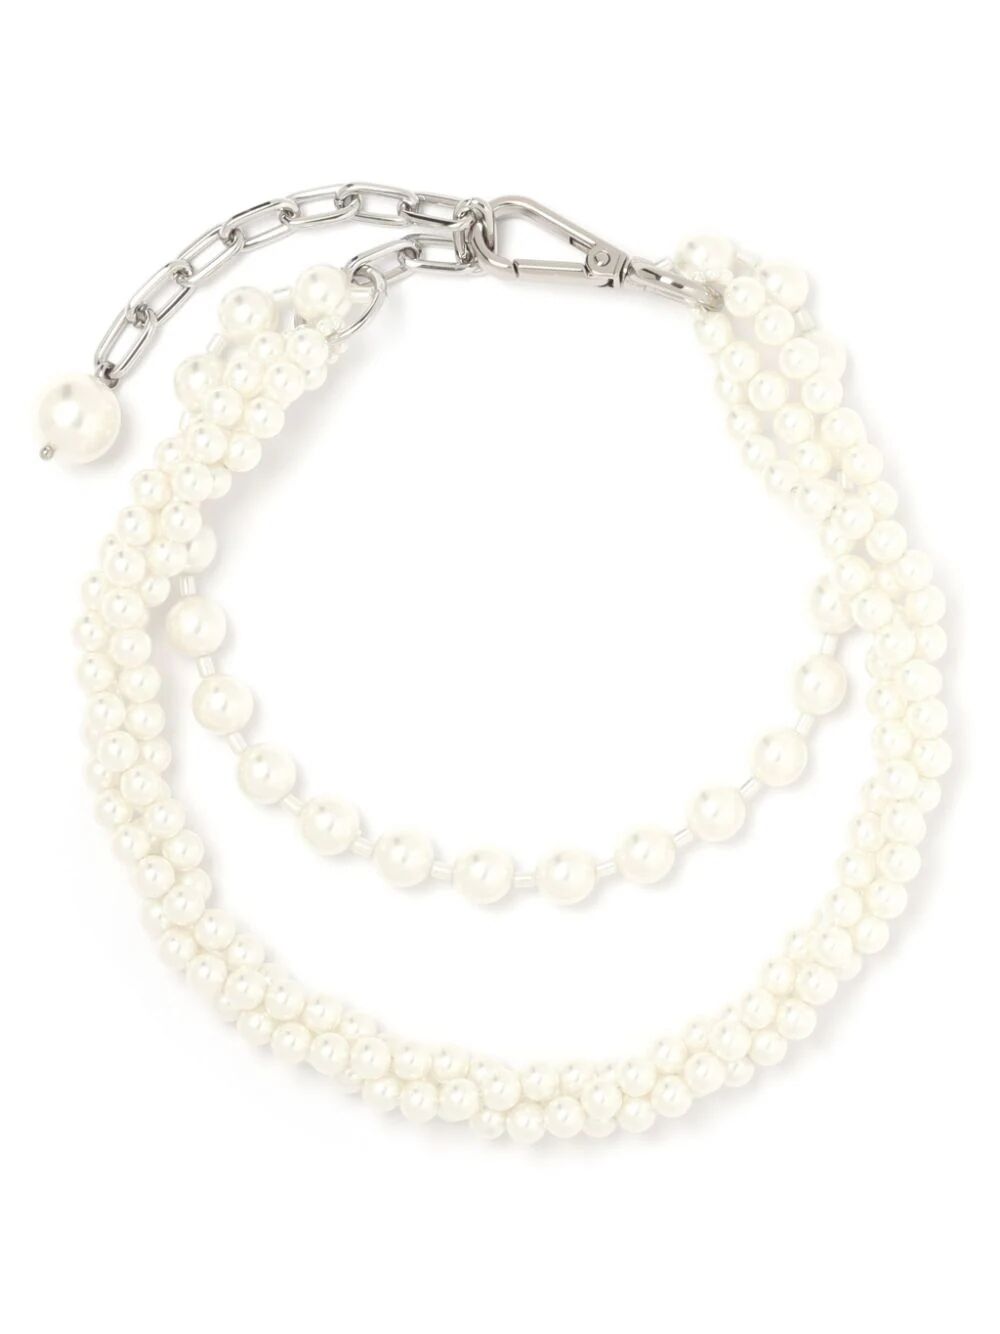 SIMONE ROCHA-DOUBLE TWISTED NECKLACE-NKS55 M 0904 PEARL